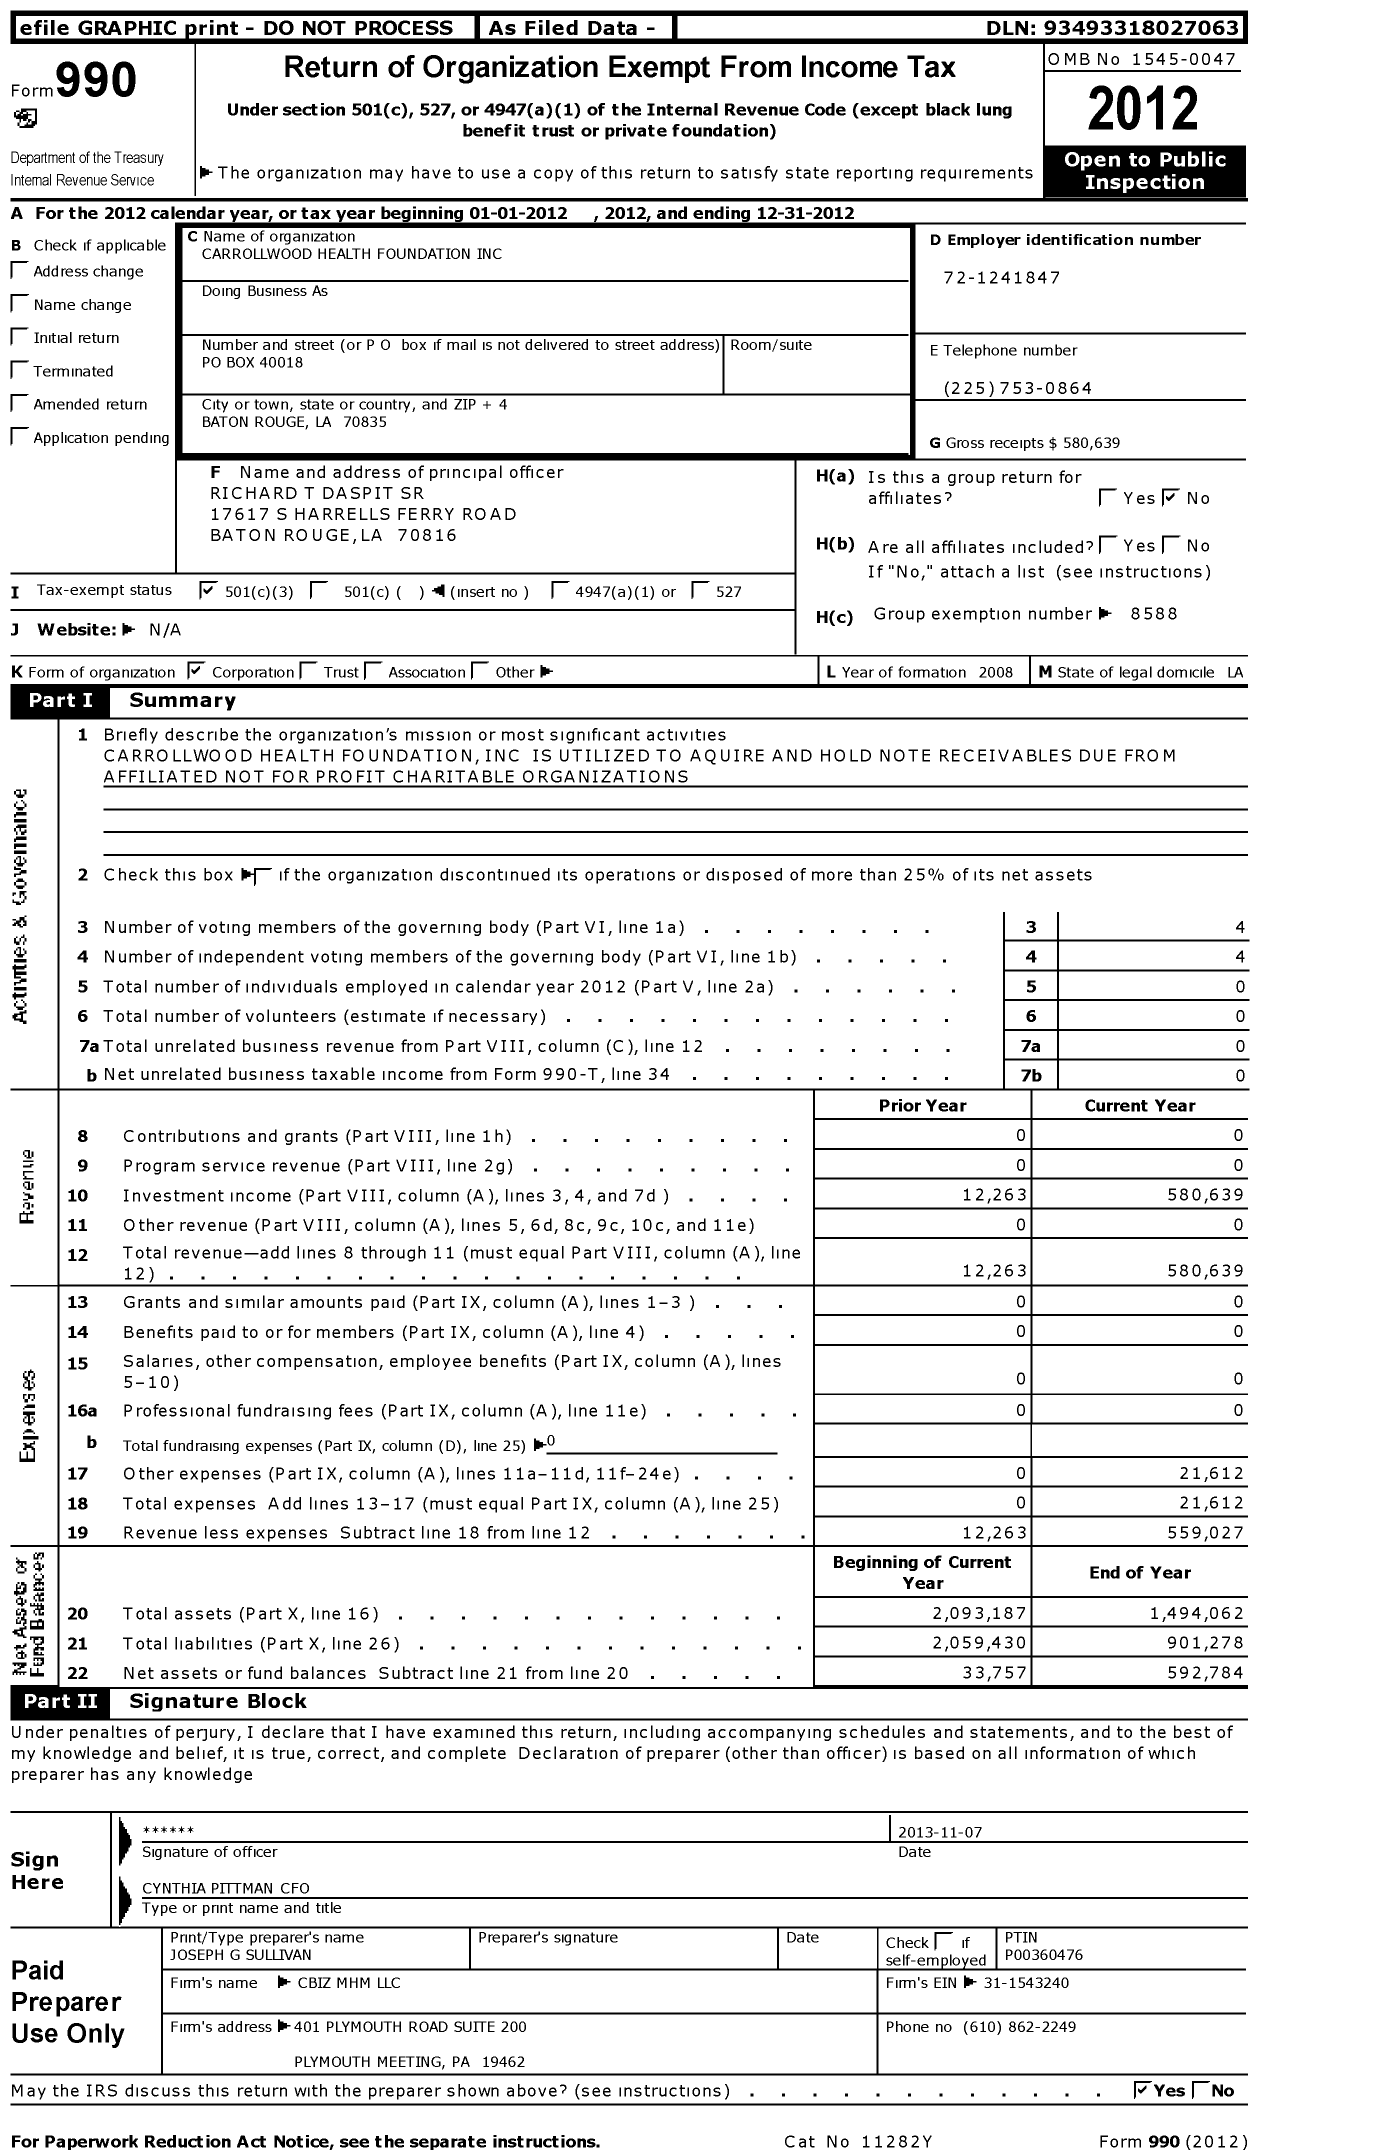 Image of first page of 2012 Form 990 for Foundation Health Services / Carrollwood Health Foundation Inc